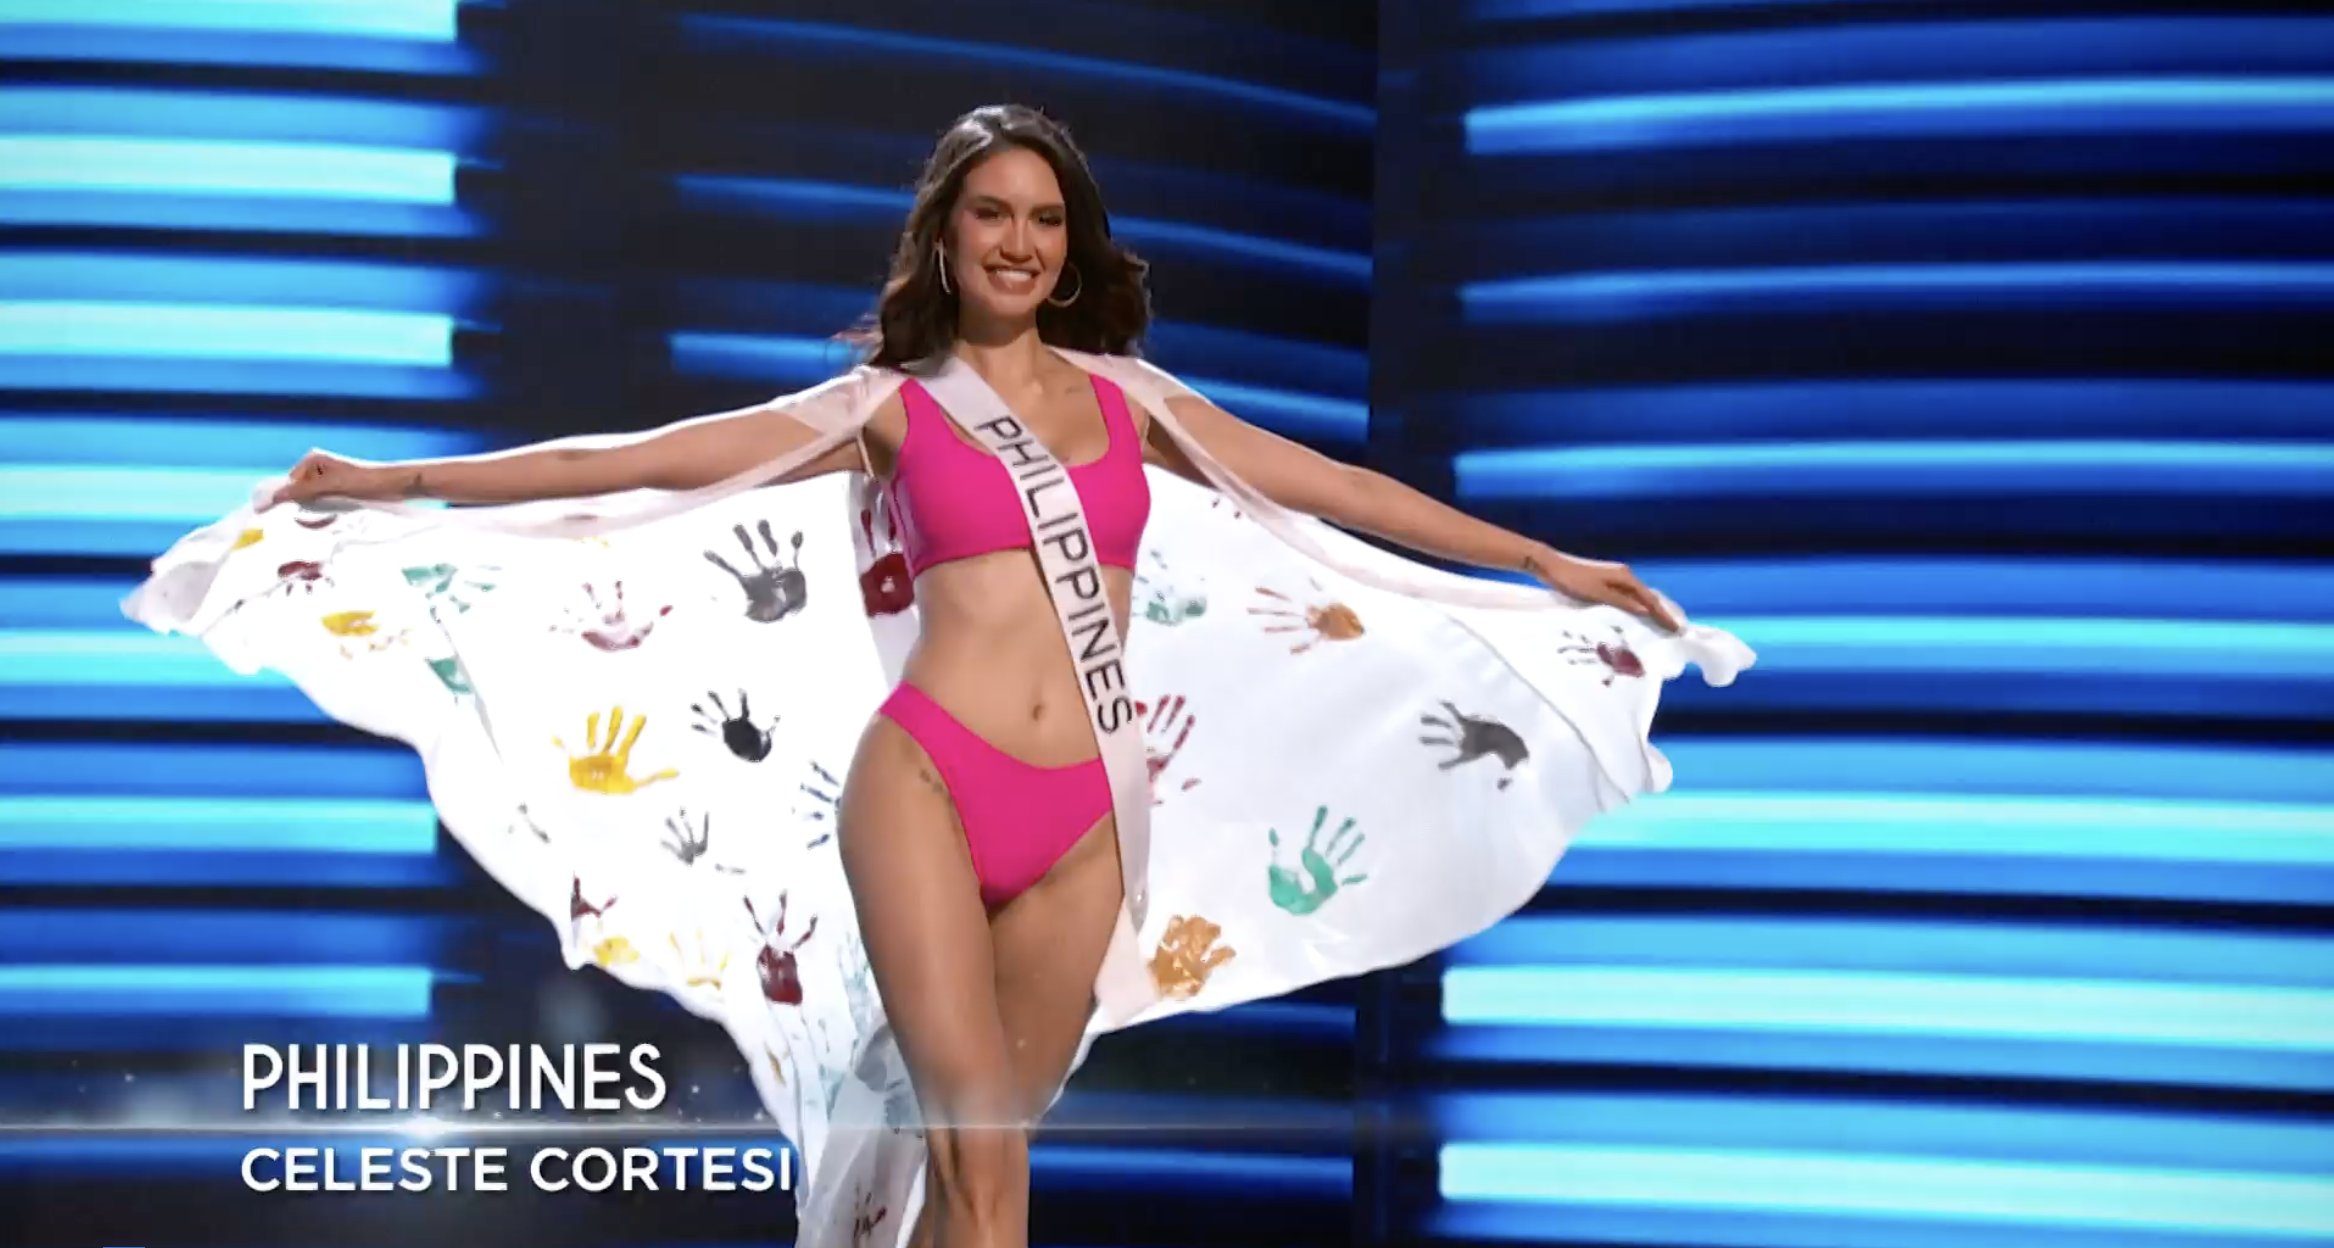 LOOK: Celeste Cortesi’s swimsuit cape for Miss Universe 2022 prelims designed by kids from Marawi